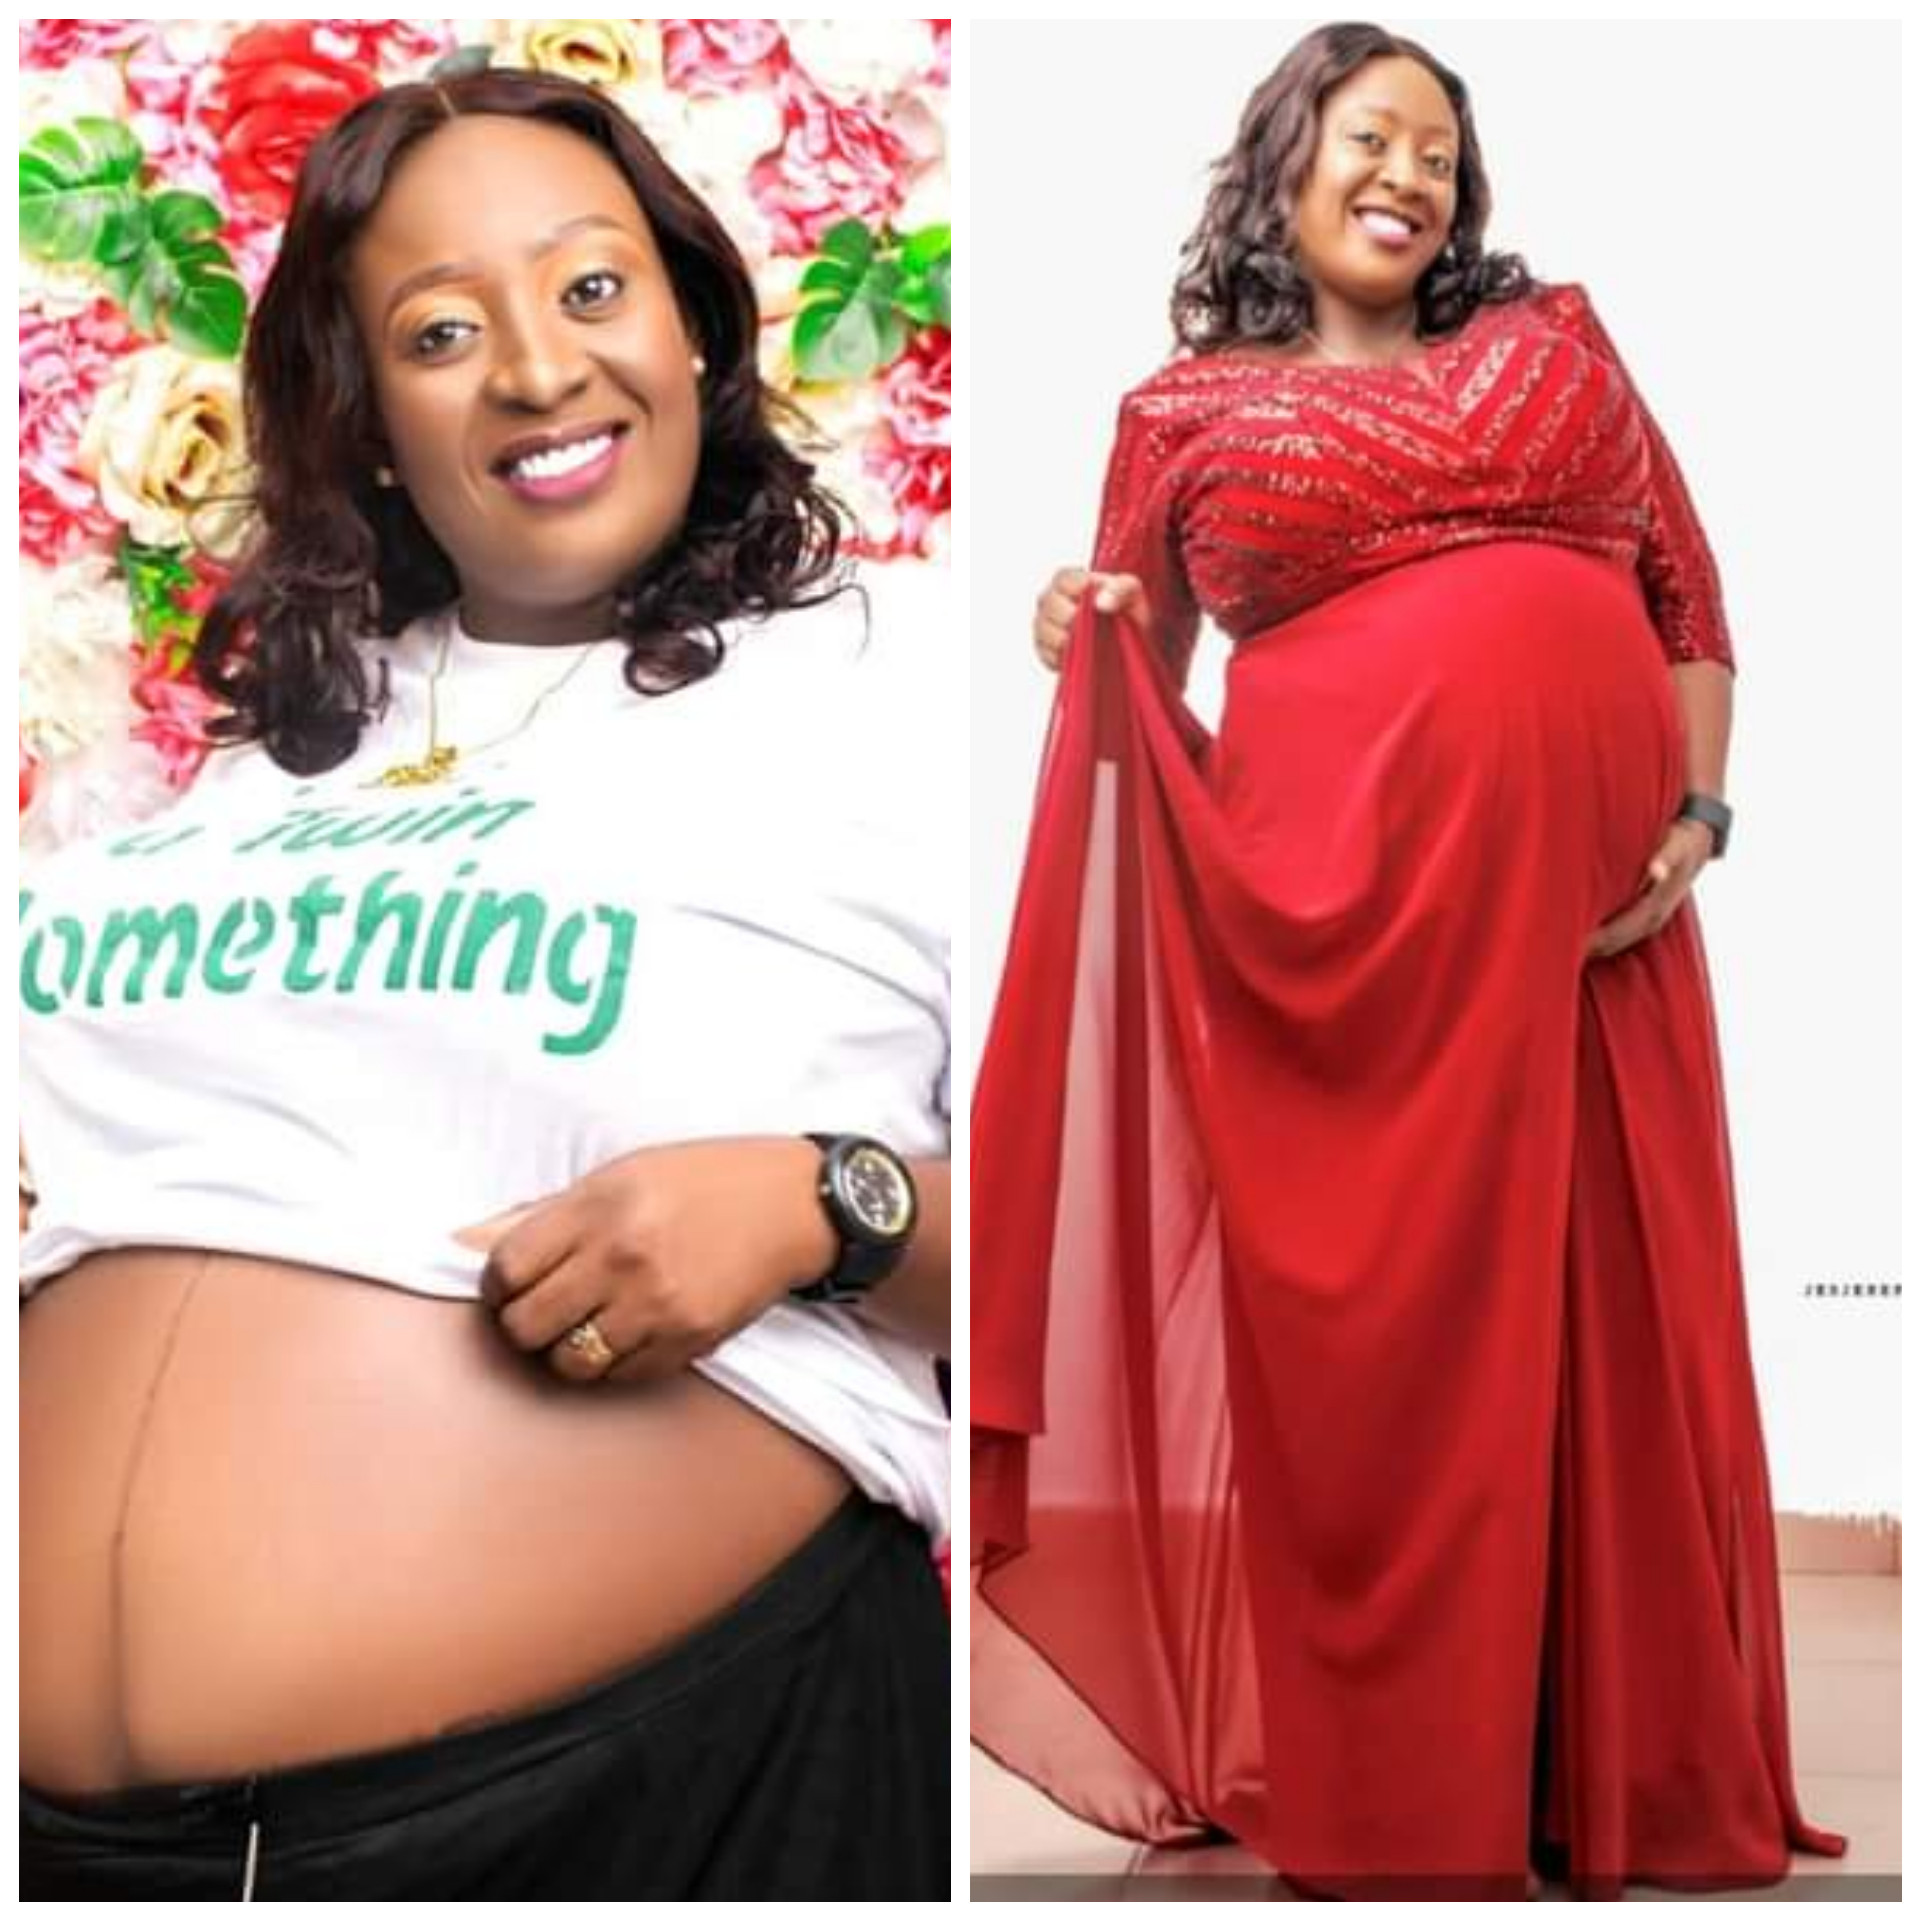 NIGERIAN WOMAN GIVES BIRTH TO TWINS AFTER 20 YEARS OF WAITING